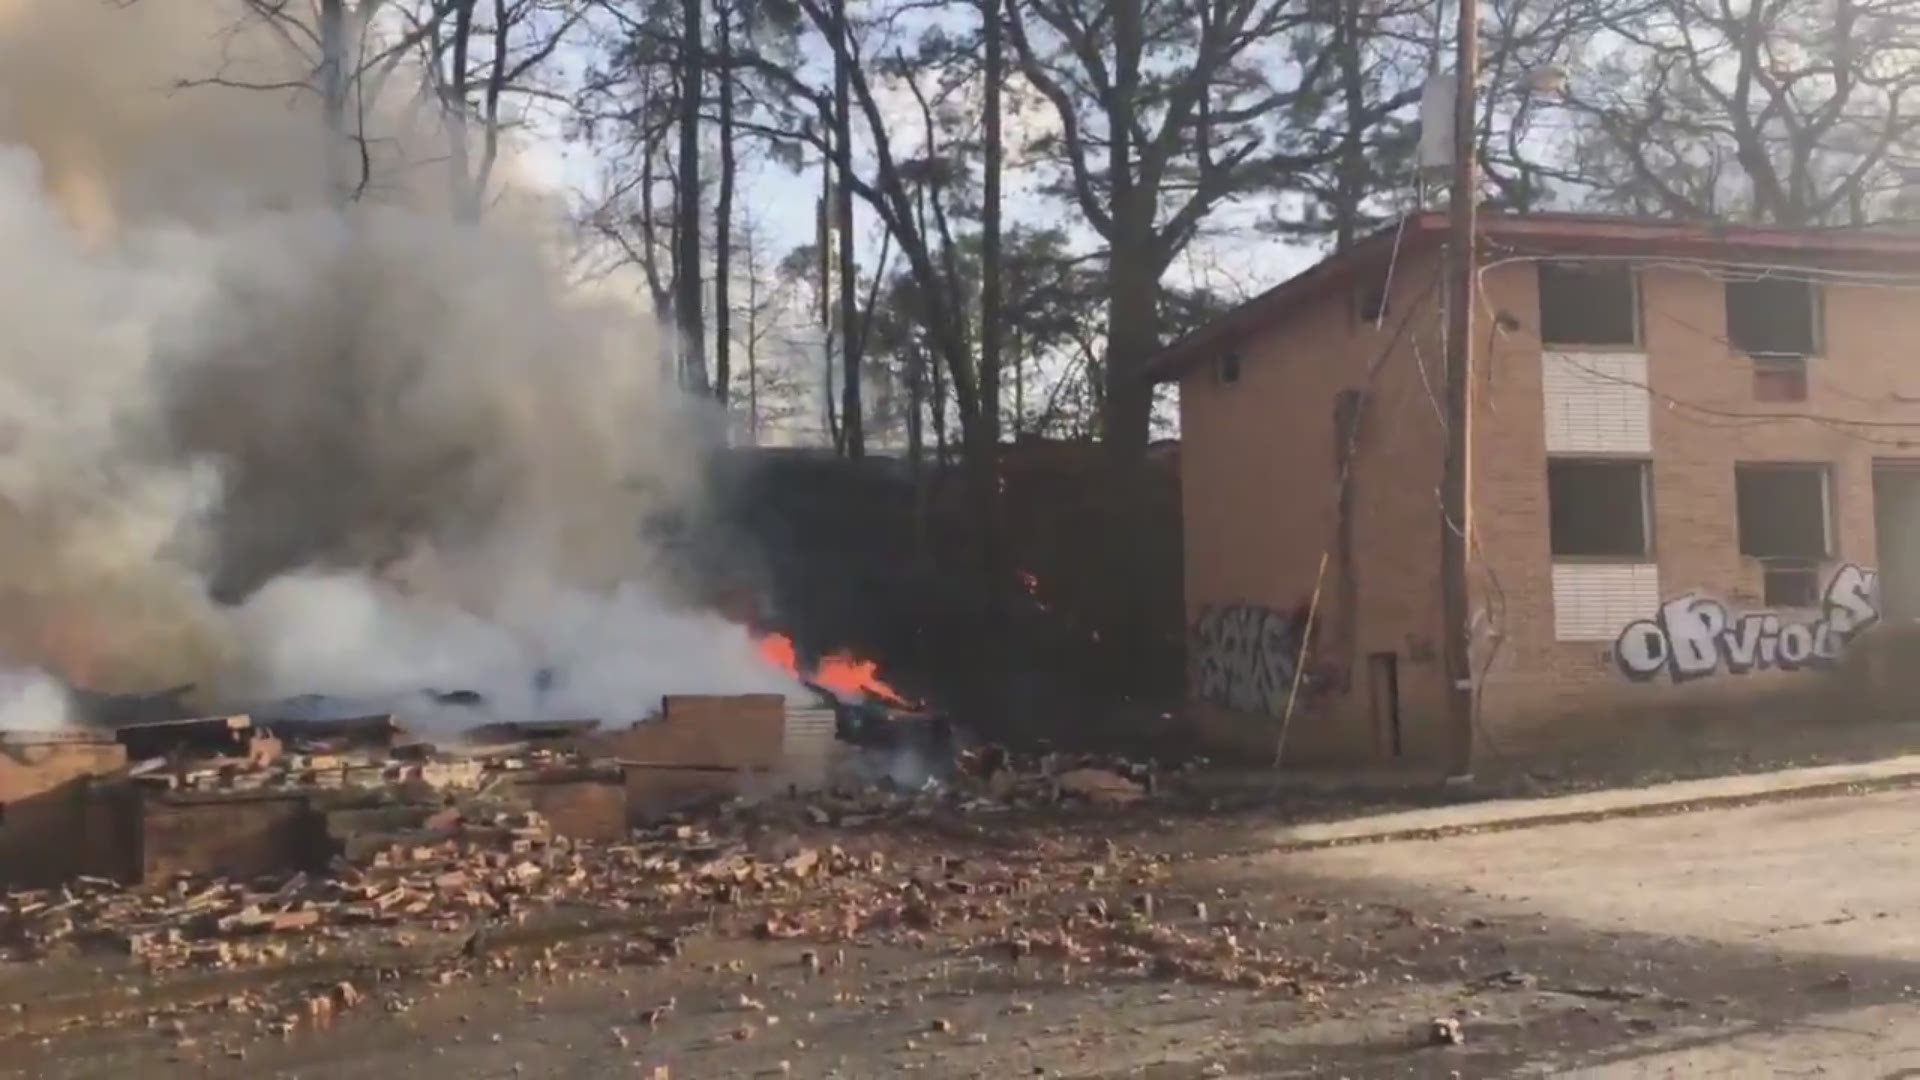 Twitter users were quick to spot a column of smoke over the city. Fire officials have confirmed exactly where it came from as they responded on Tuesday to 325 Chappell Road. (Video courtesy of Atlanta Fire)